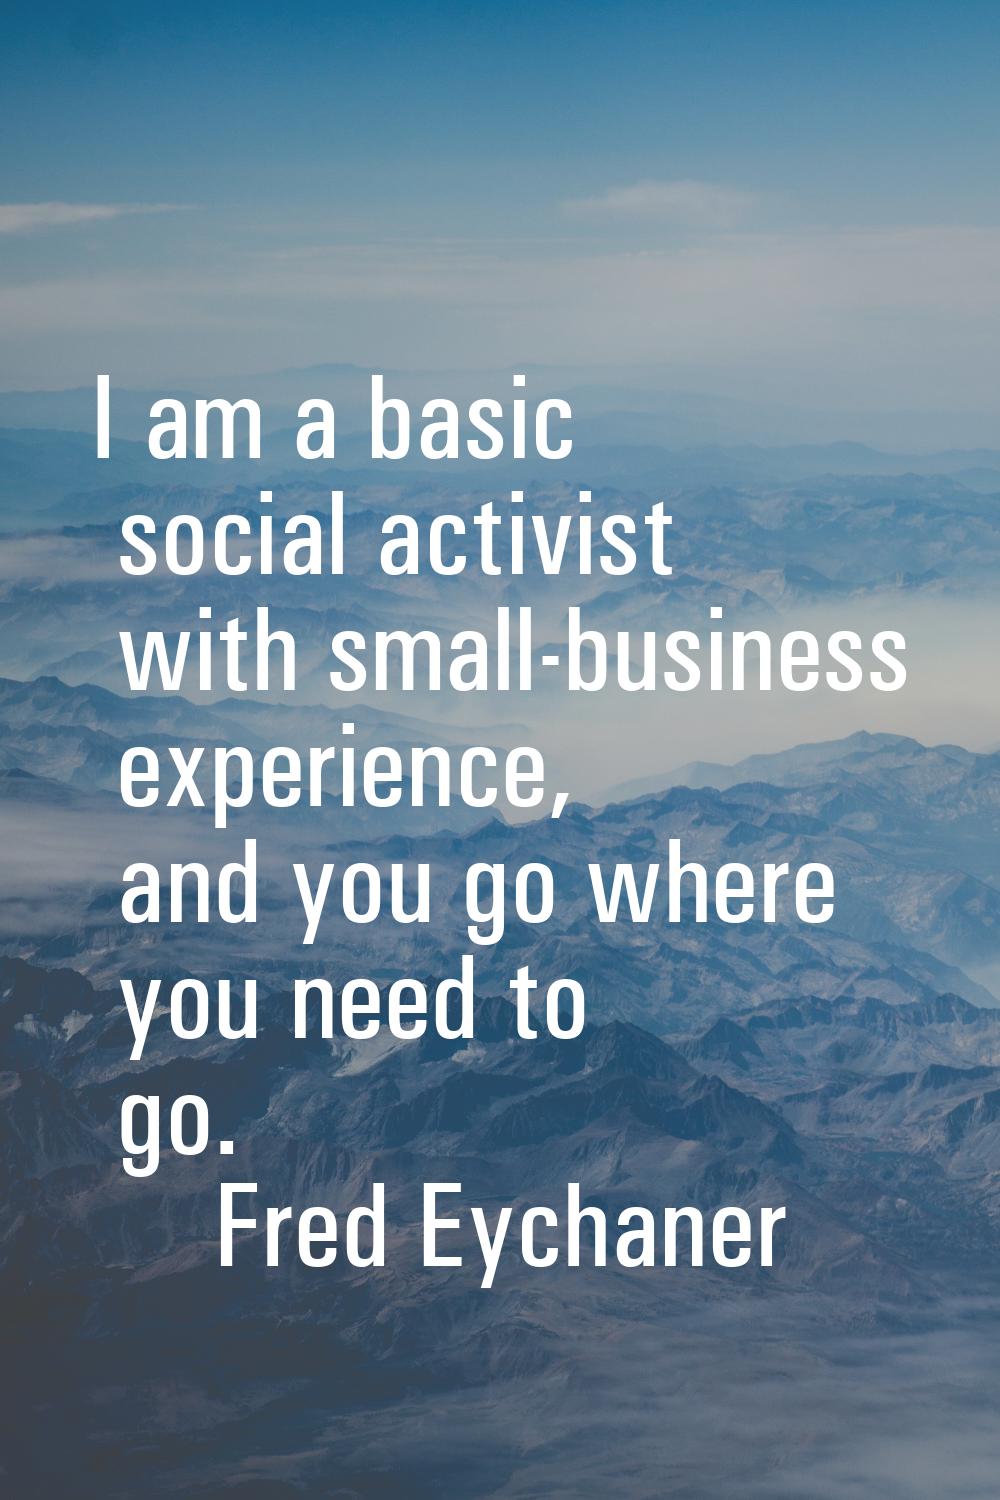 I am a basic social activist with small-business experience, and you go where you need to go.